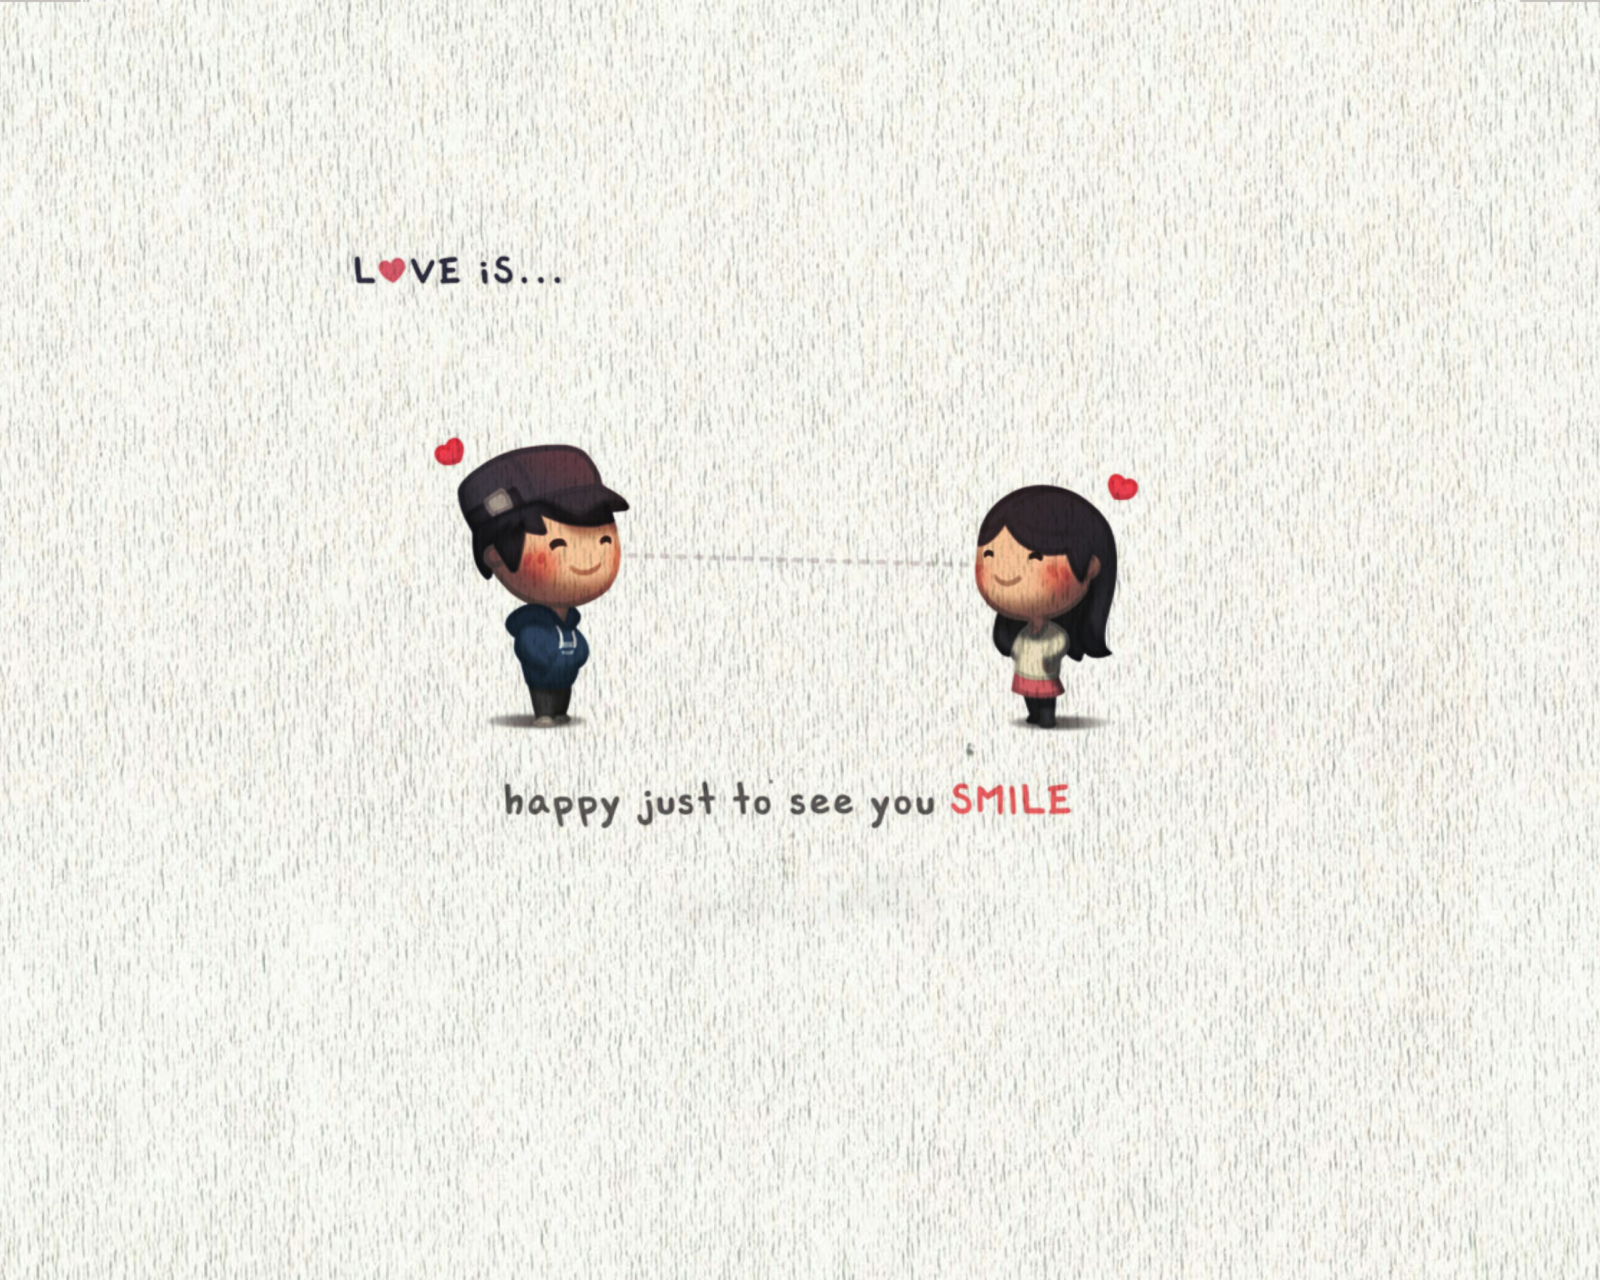 Love Is Happy Just To See You Smile wallpaper 1600x1280